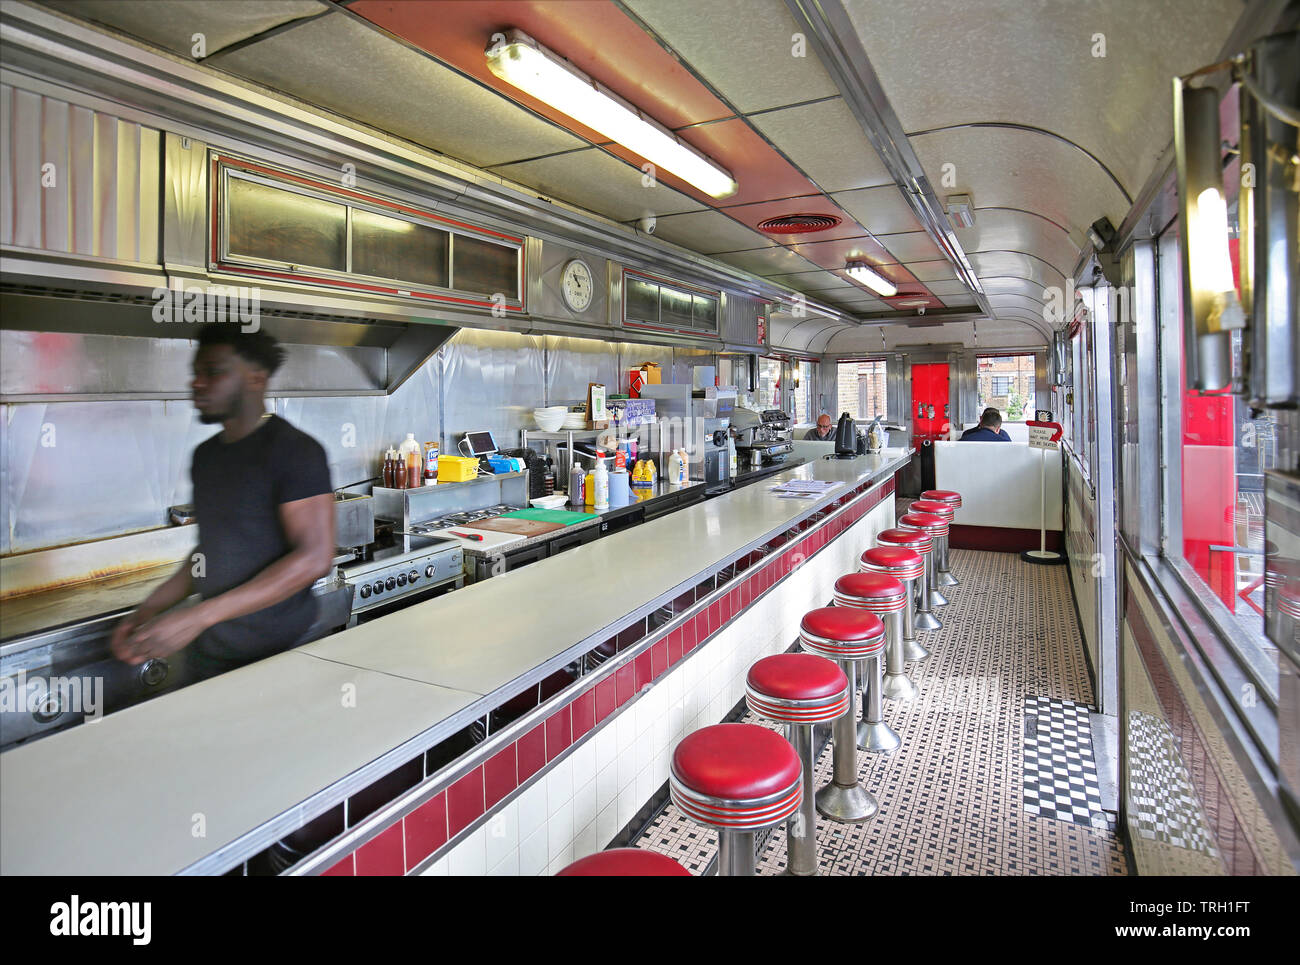 American Diner Interior High Resolution Stock Photography And Images Alamy